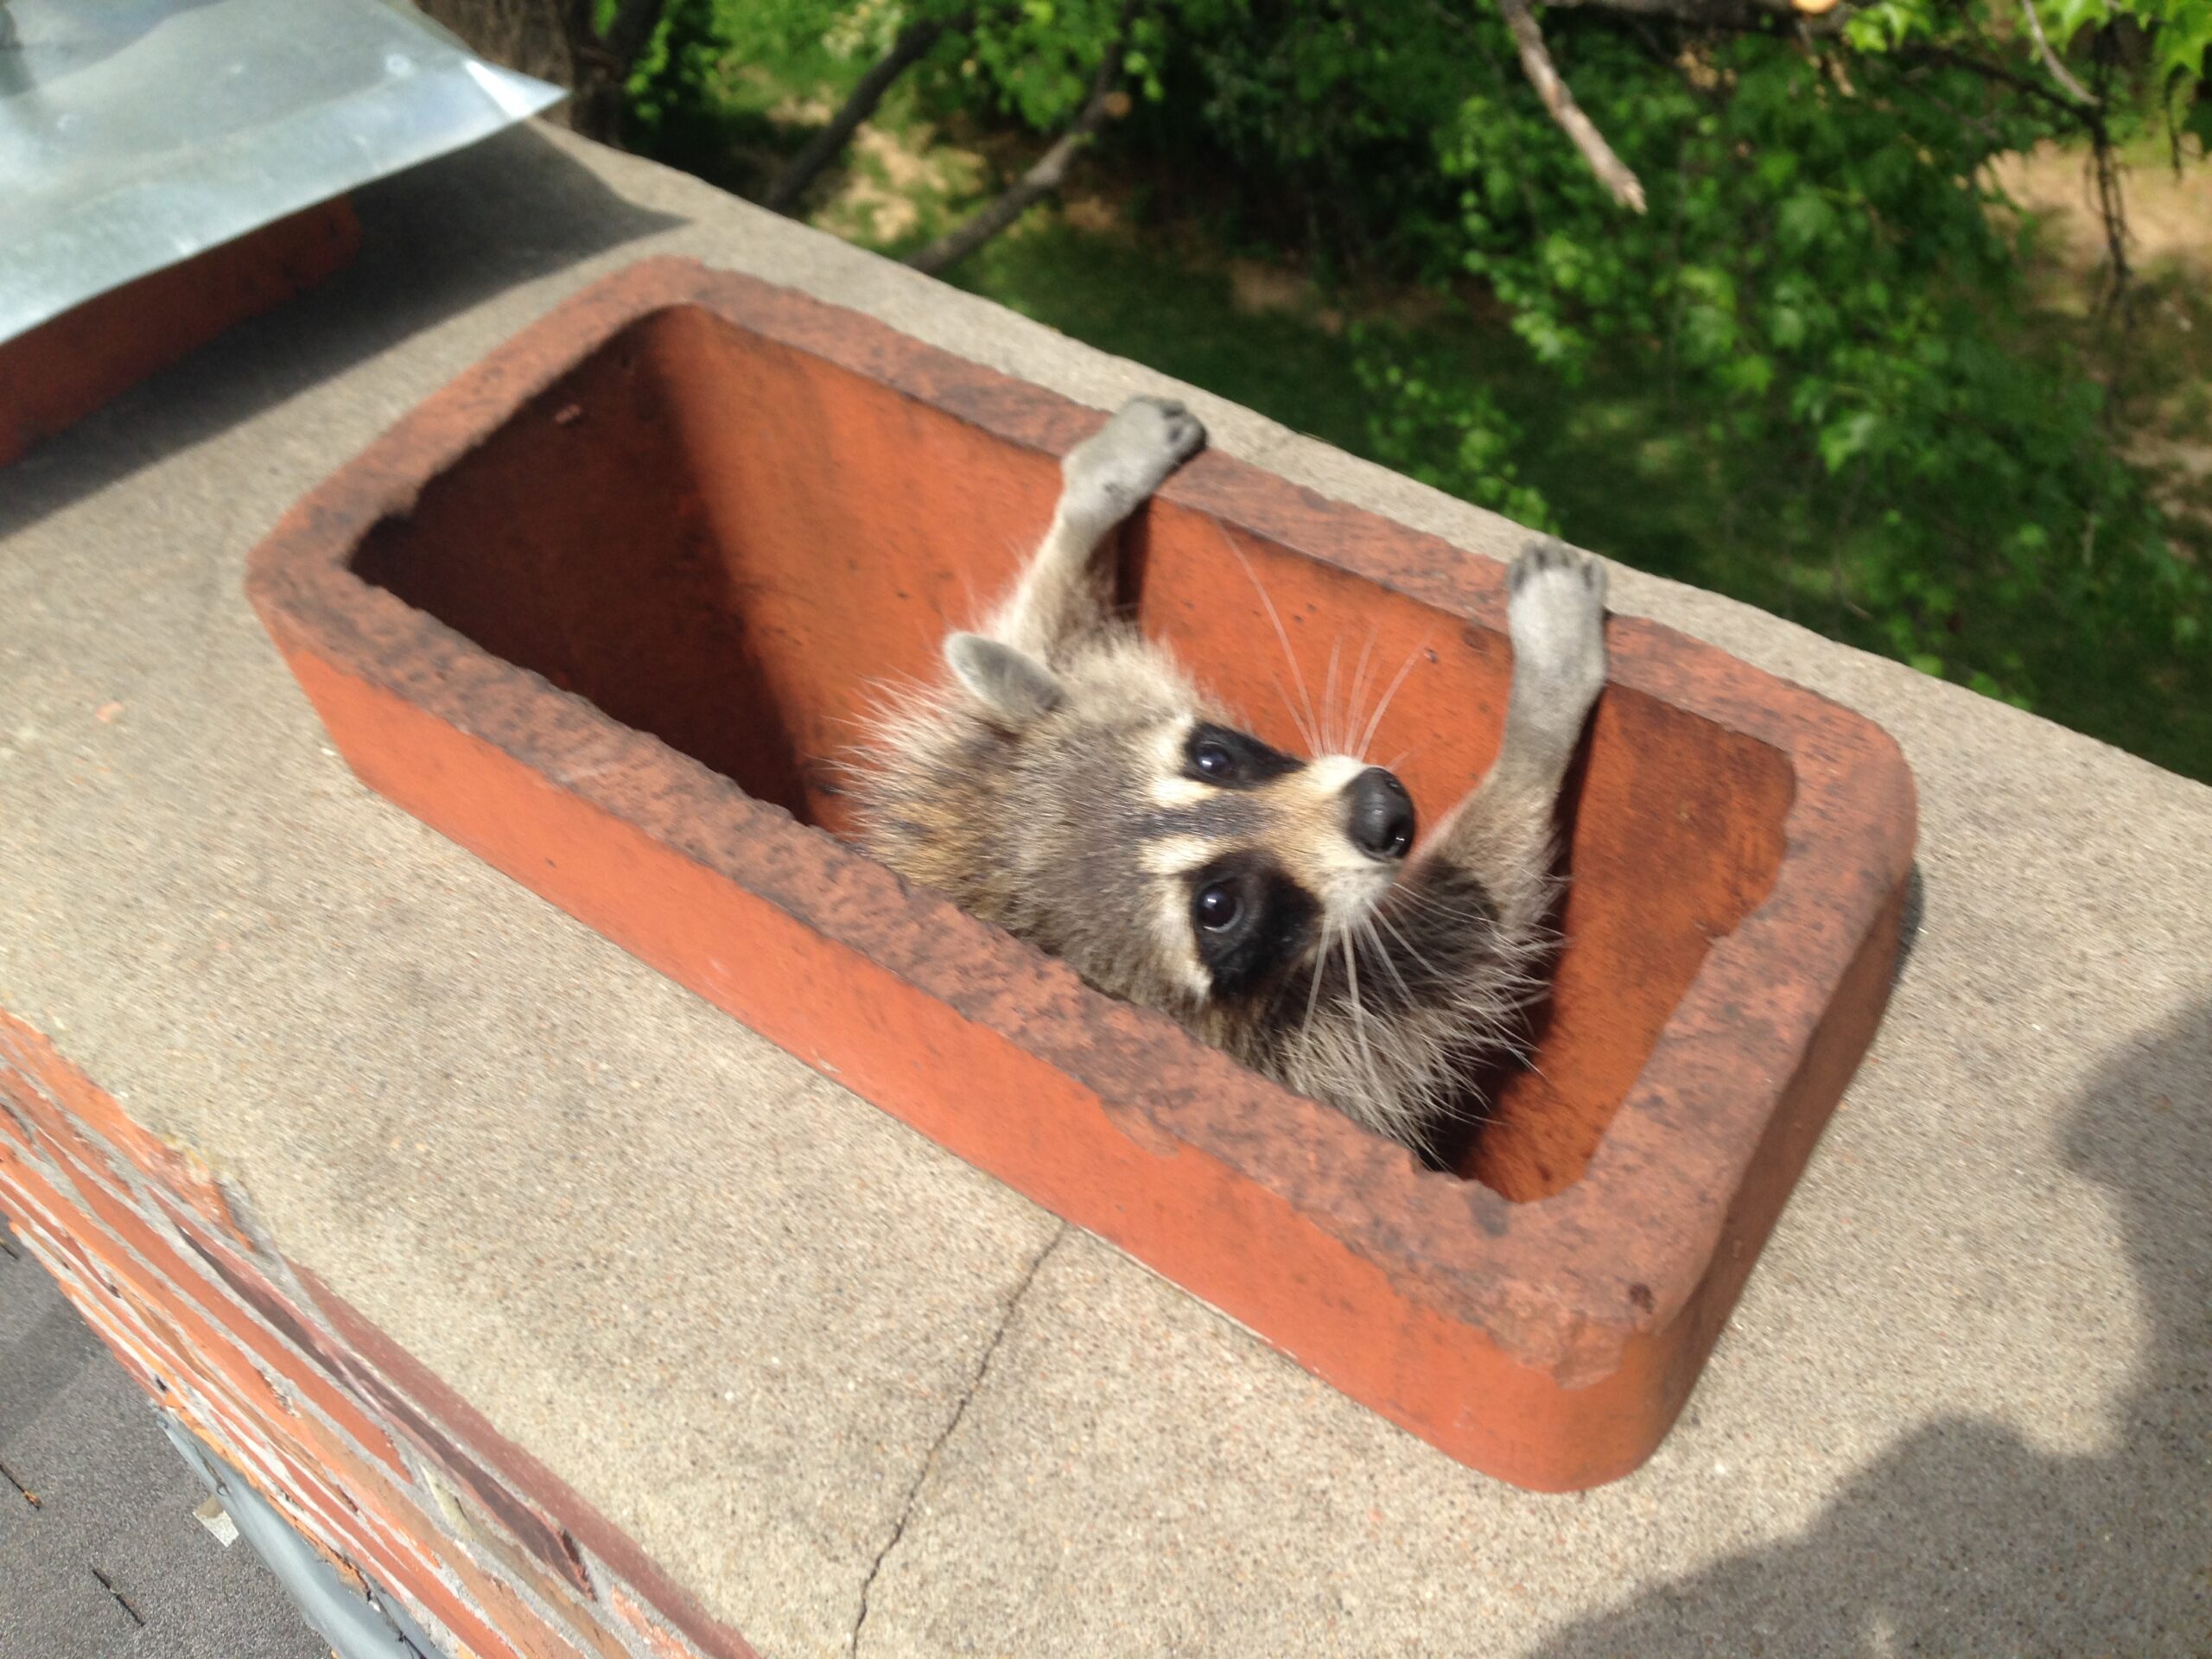 Raccoon Removal, Raccoons in Attic, Damage Repair, Independence MO